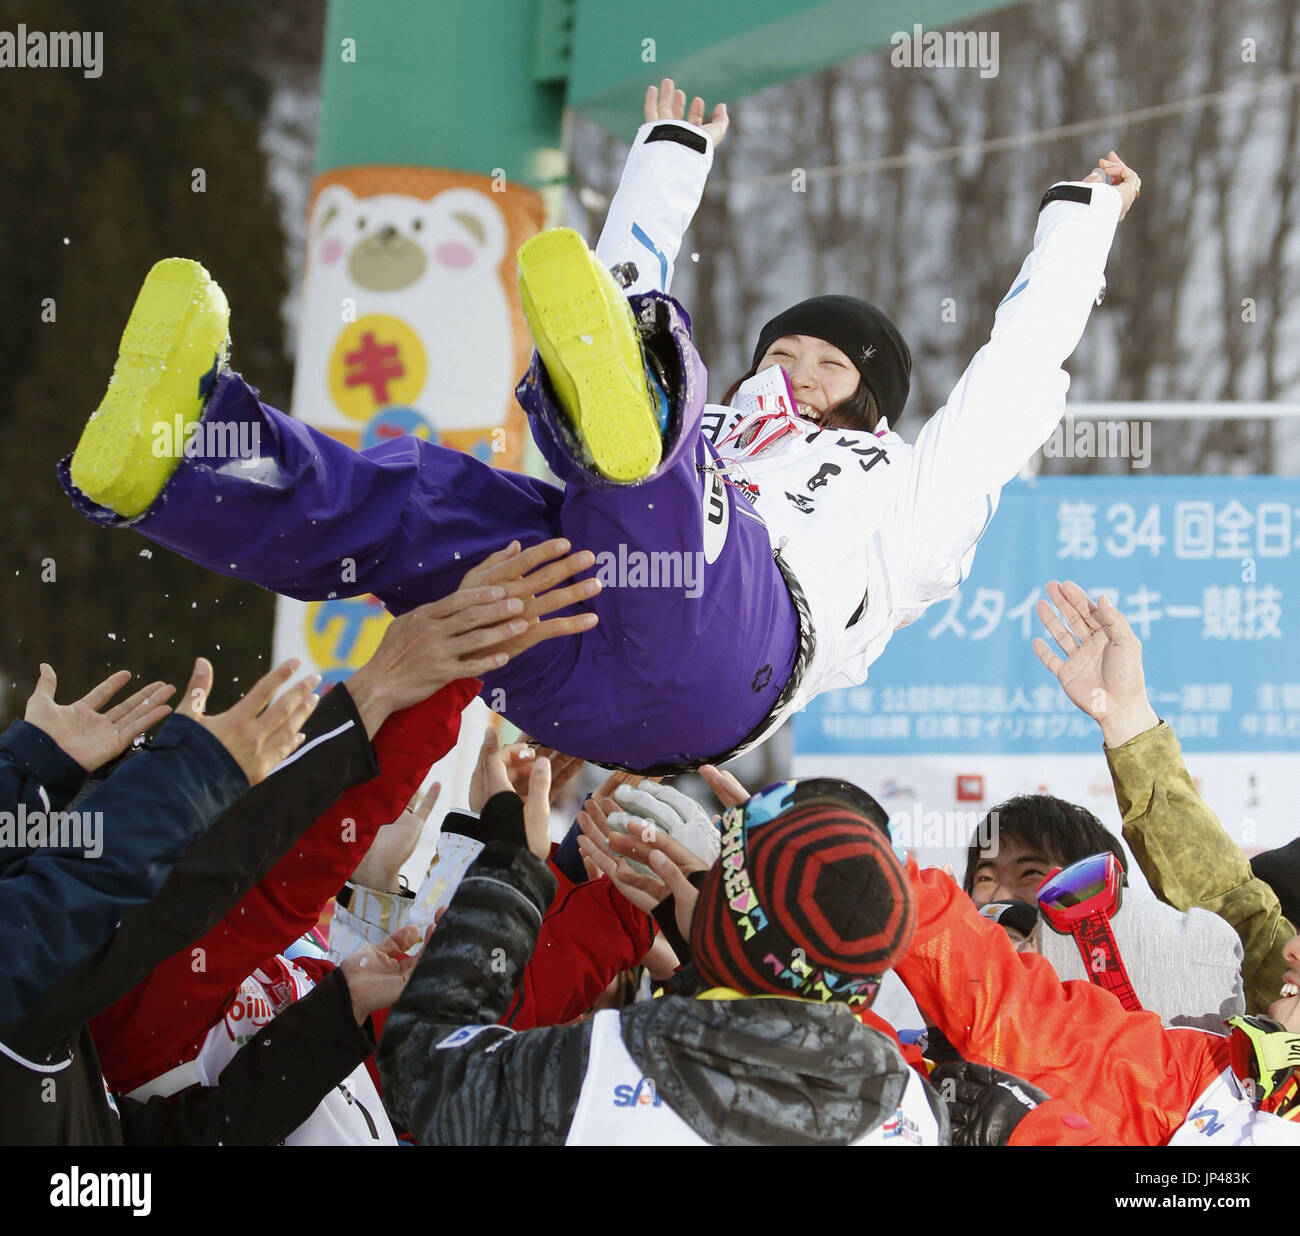 HAKUBA, Japan - Fellow Japanese skiers toss Aiko Uemura after she won her eighth moguls title at the freestyle skiing national championships in her last competitive appearance in Hakuba, Nagano Prefecture, on March 27, 2014. Uemura, a five-time Olympian, won the overall World Cup crown in the 2007-2008 season and two titles at the 2009 world freestyle championships. (Kyodo) Stock Photo